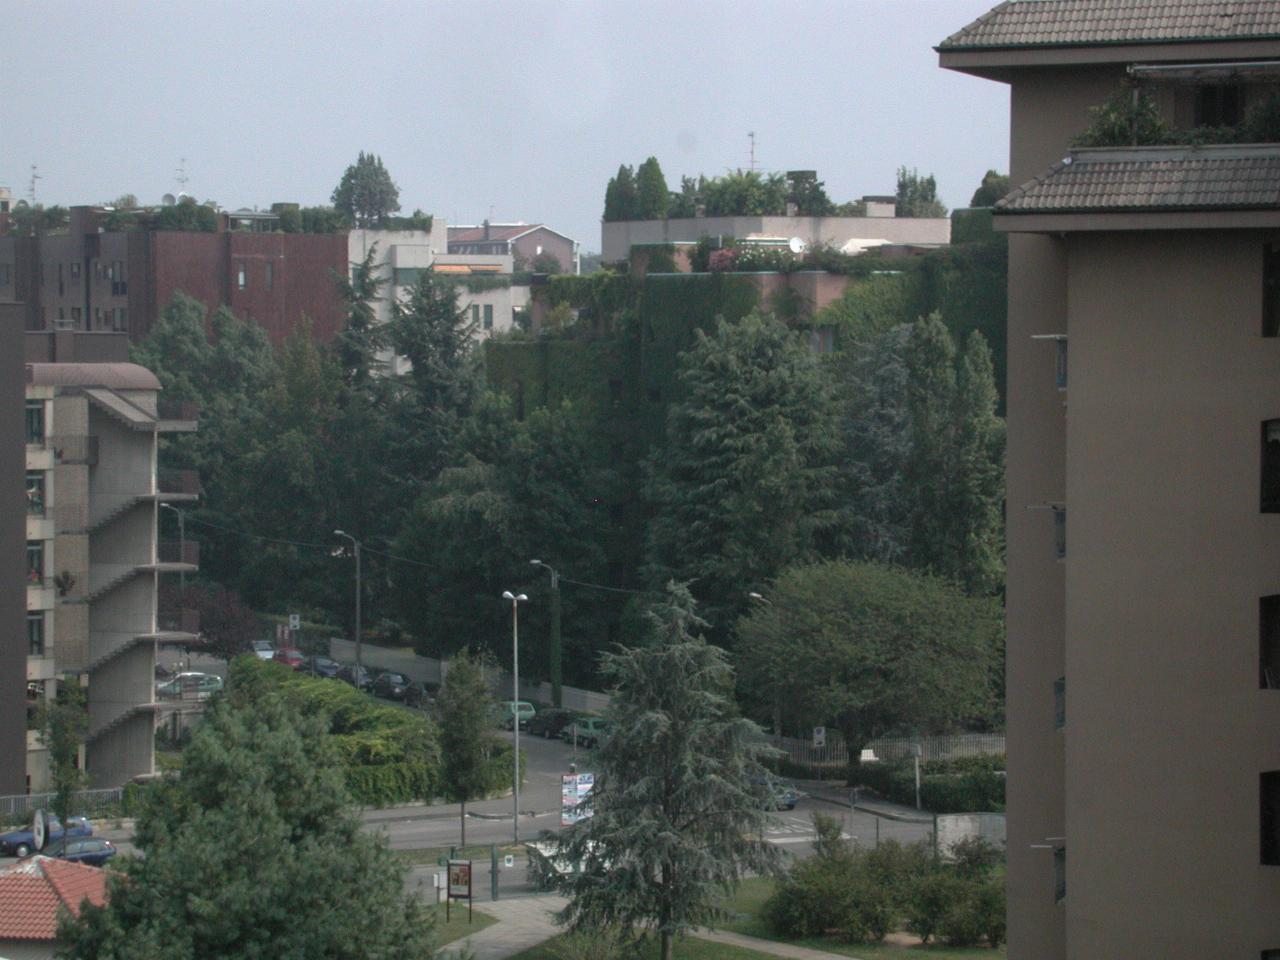 Other nearby apartment buildings, visible from Jon & Sue's apartment